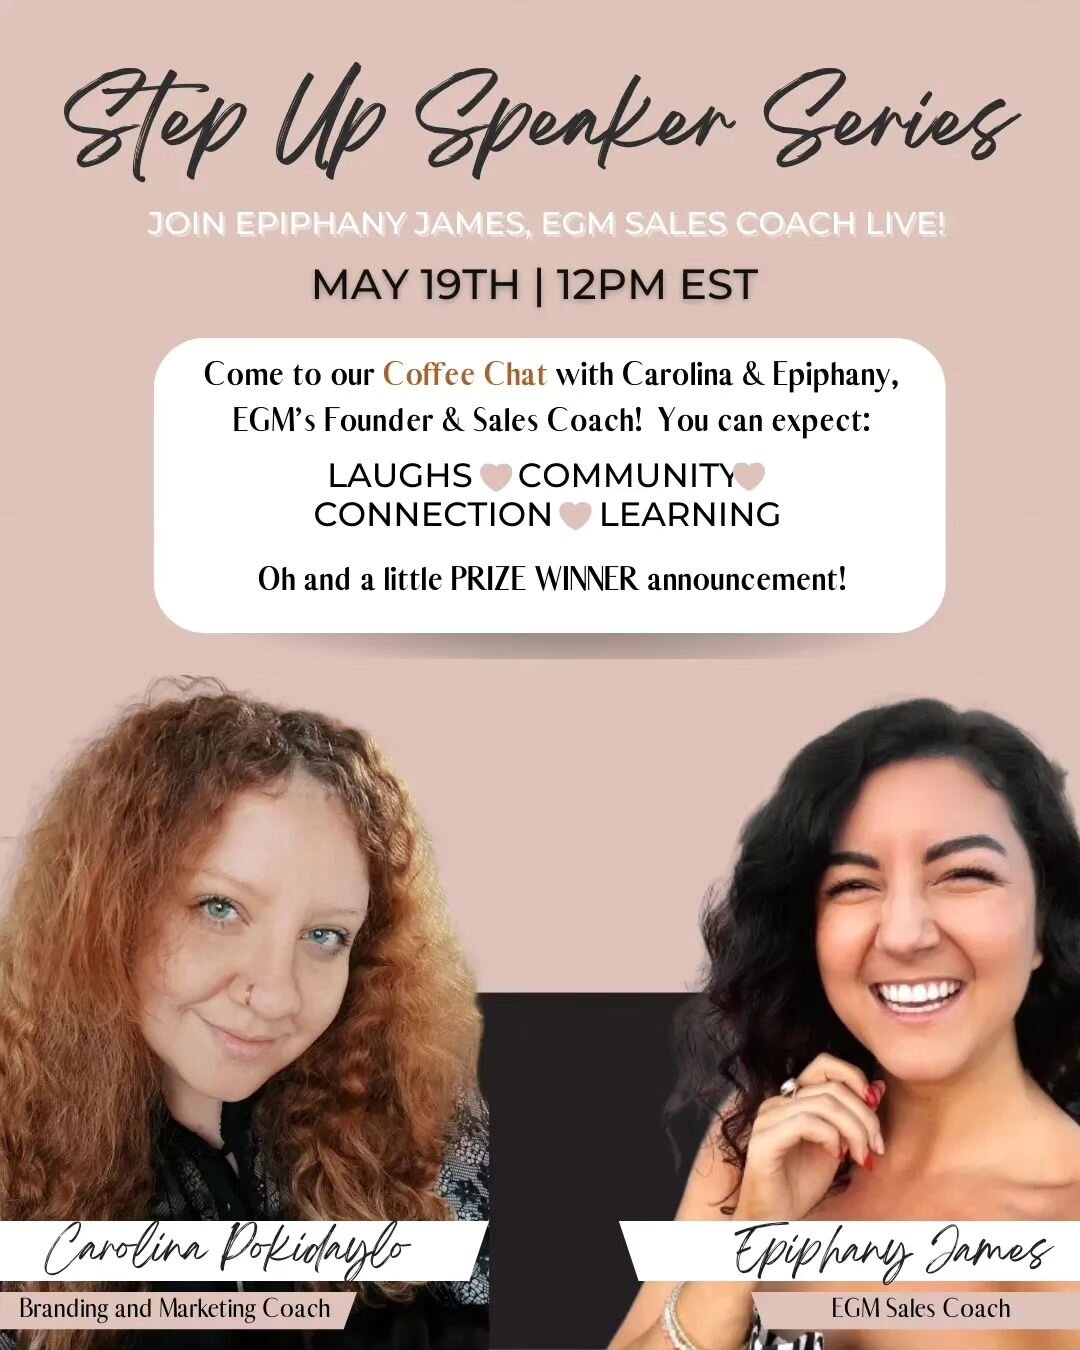 Give me a 🙌🙌 if you love Winning Prizes!

Come to our Coffee Chat with Carolina &amp; Epiphany (@epiphanyjames), EGM&rsquo;s Founder &amp; Sales Coach! ☕&hearts;️

What to expect:

❤️Laughs
❤️Community
❤️Connection
❤️Learning

Oh and a little PRIZE